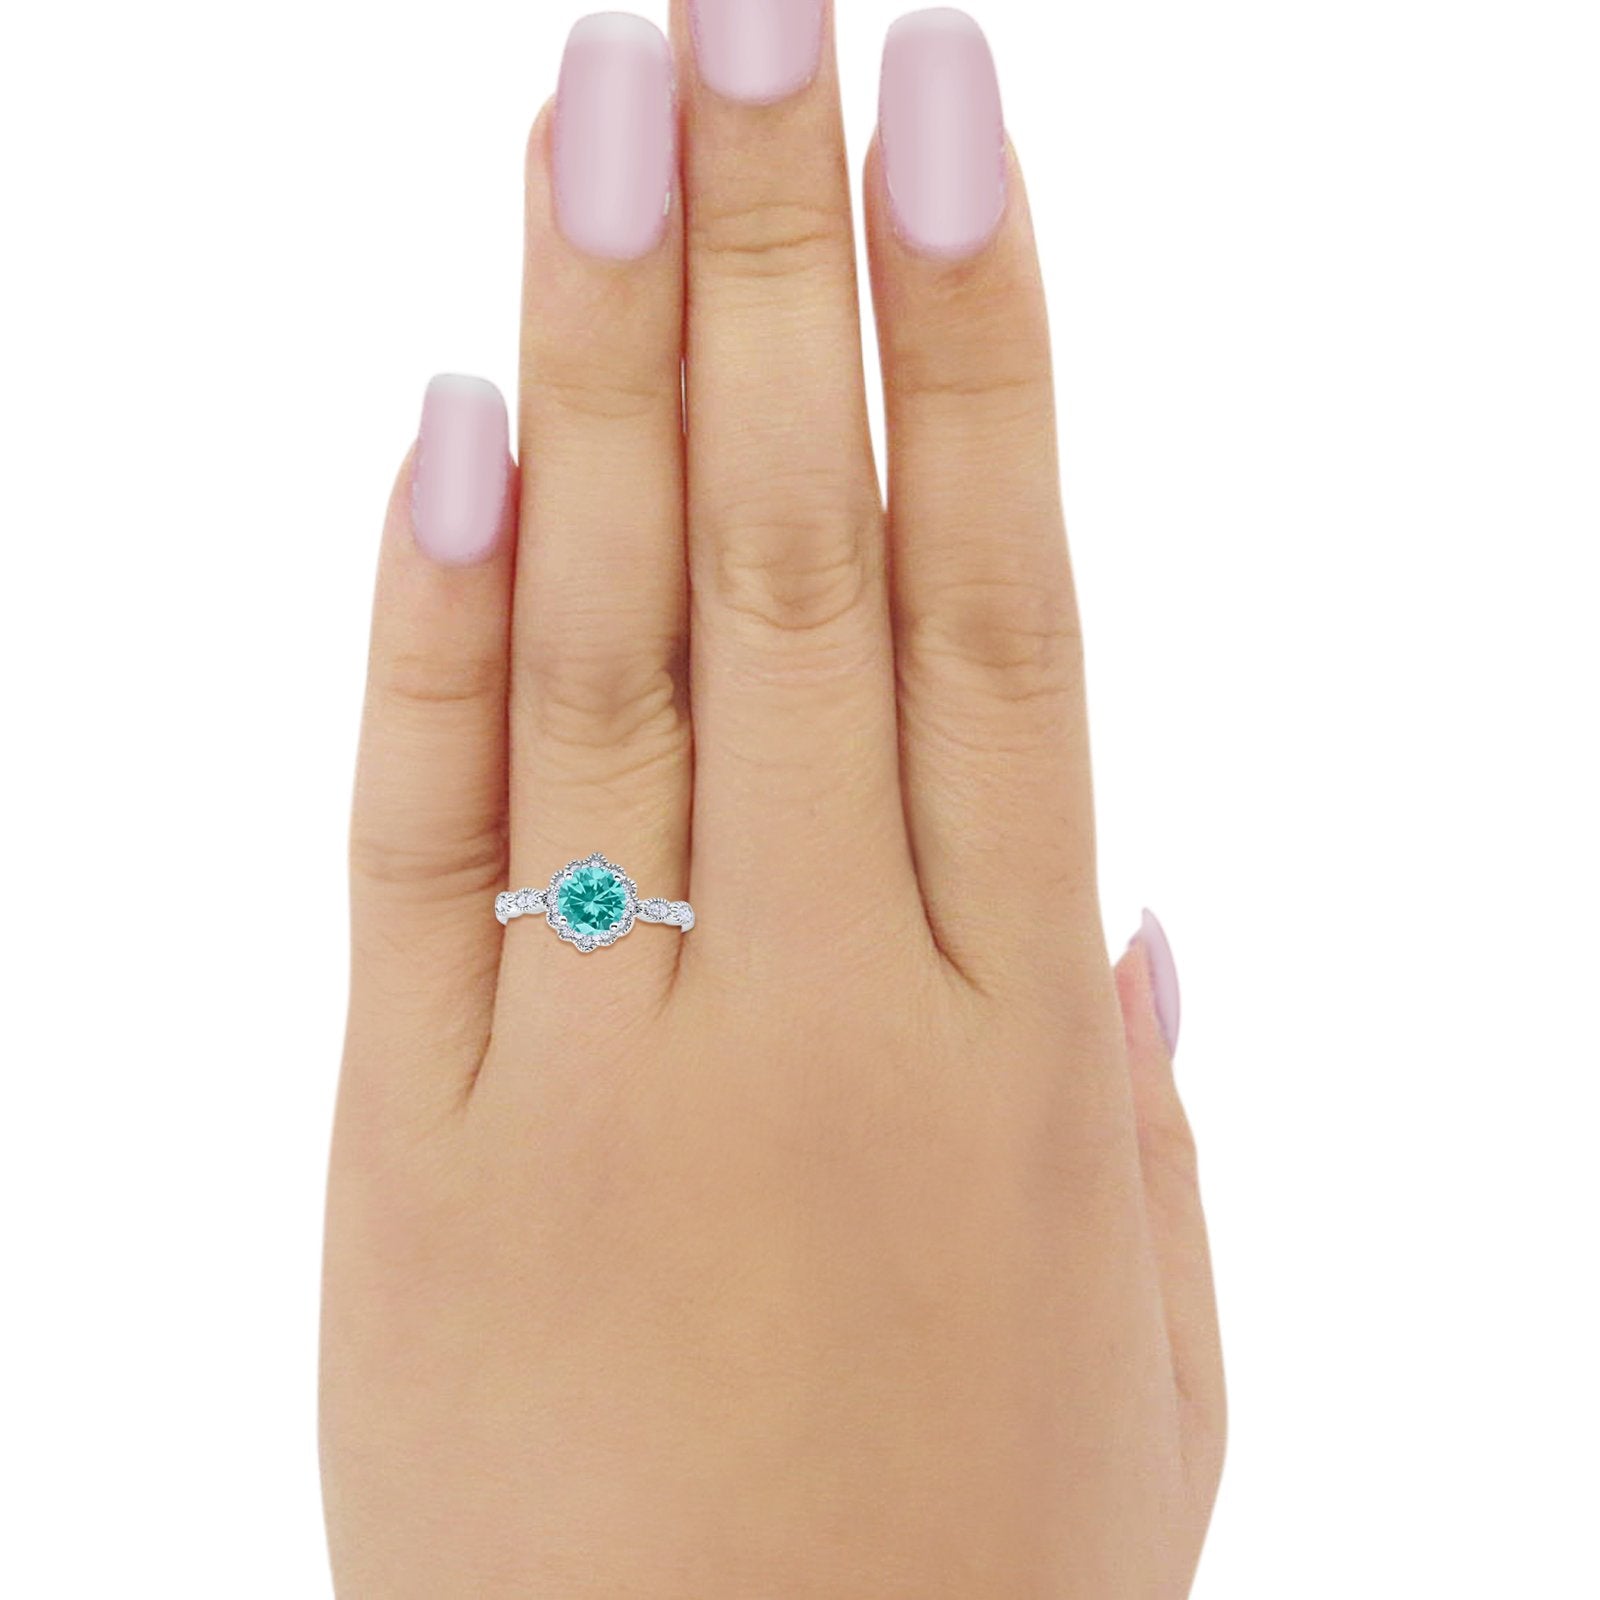 Halo Floral Art Deco Engagement Ring Simulated Paraiba Tourmaline CZ 925 Sterling Silver